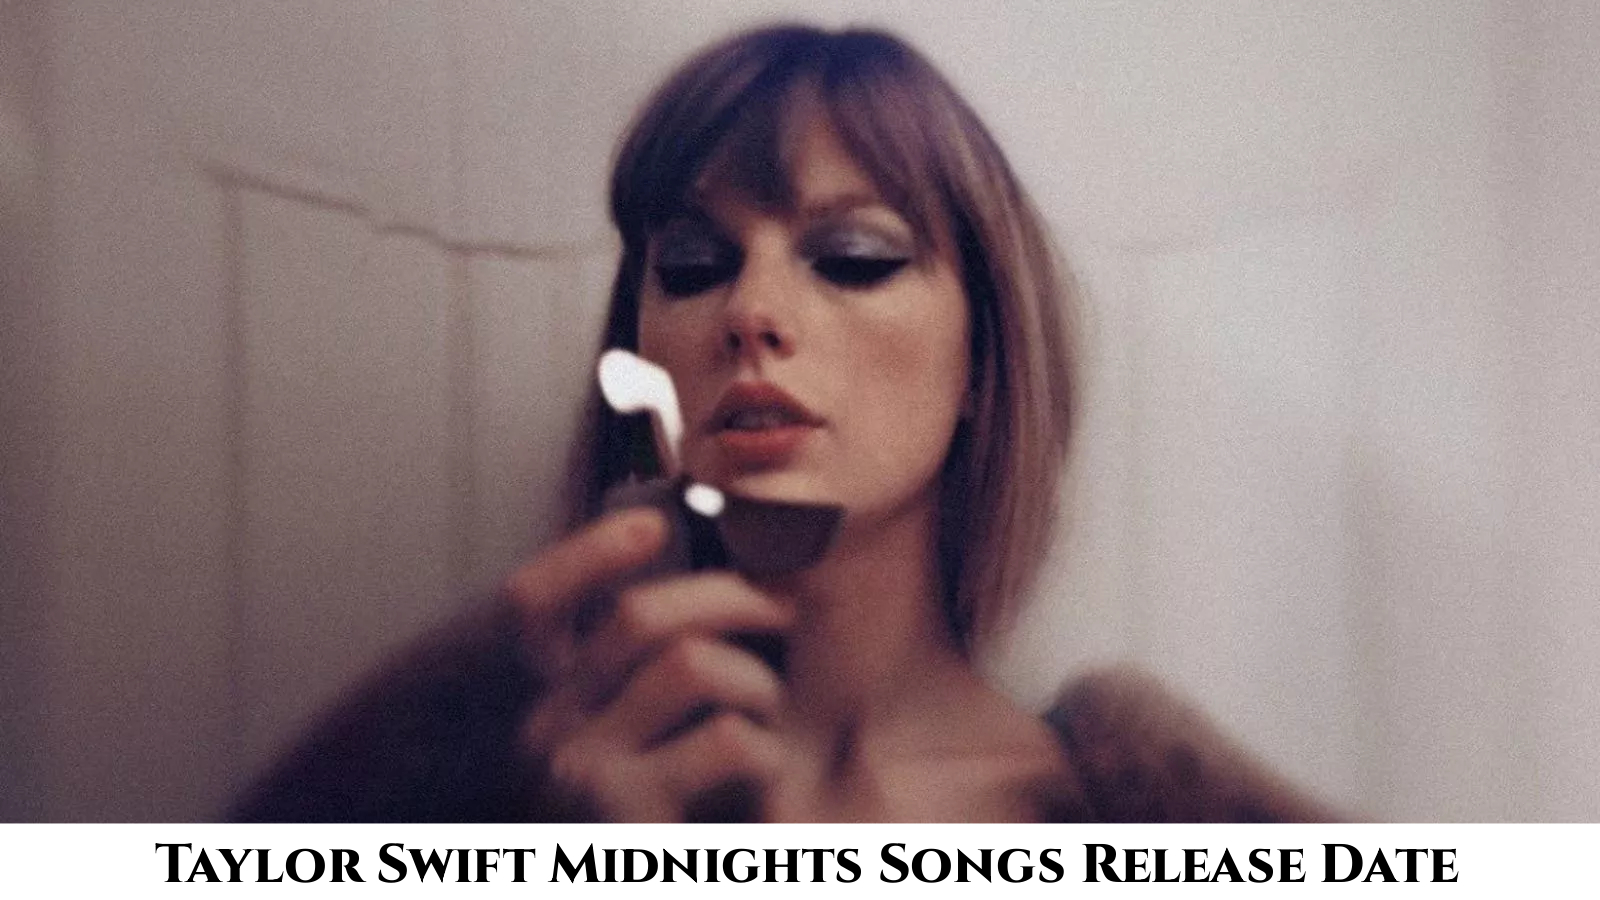 You are currently viewing Taylor Swift Midnights Songs Release Date